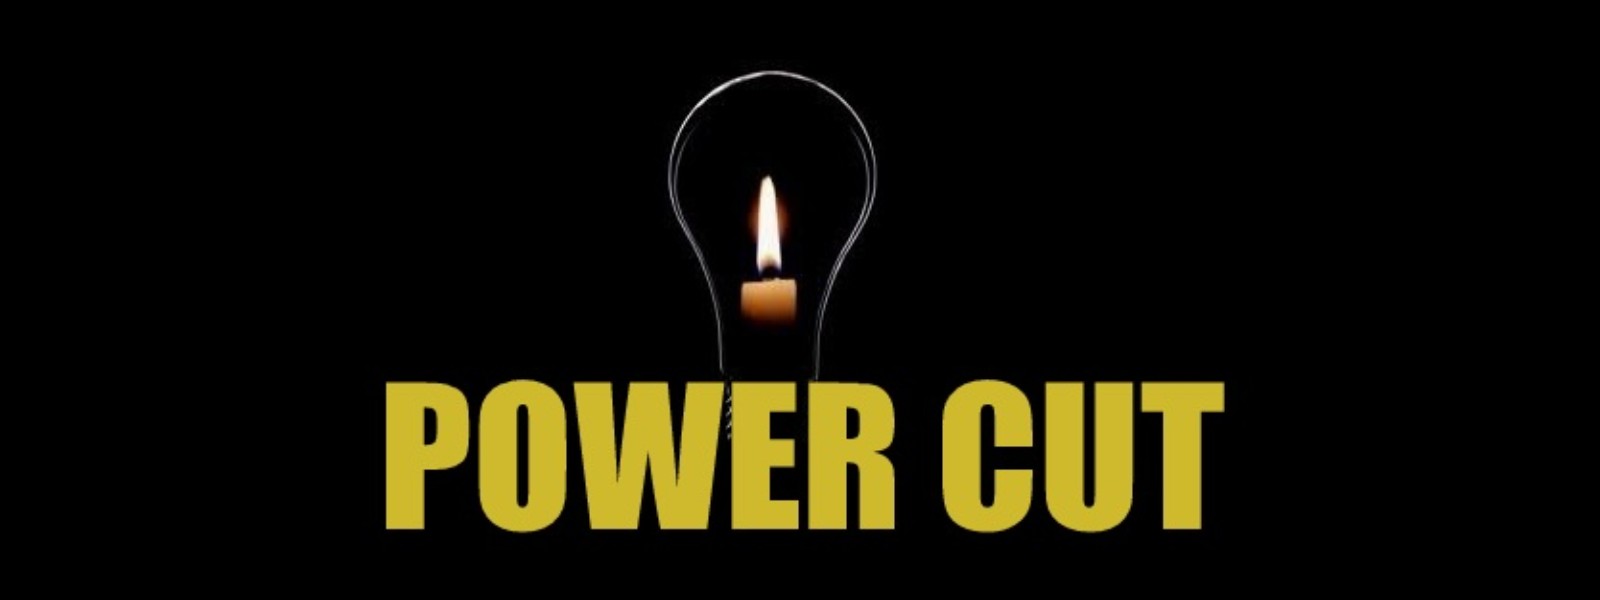 Power Cut schedule released : Find out what time you will experience an outage